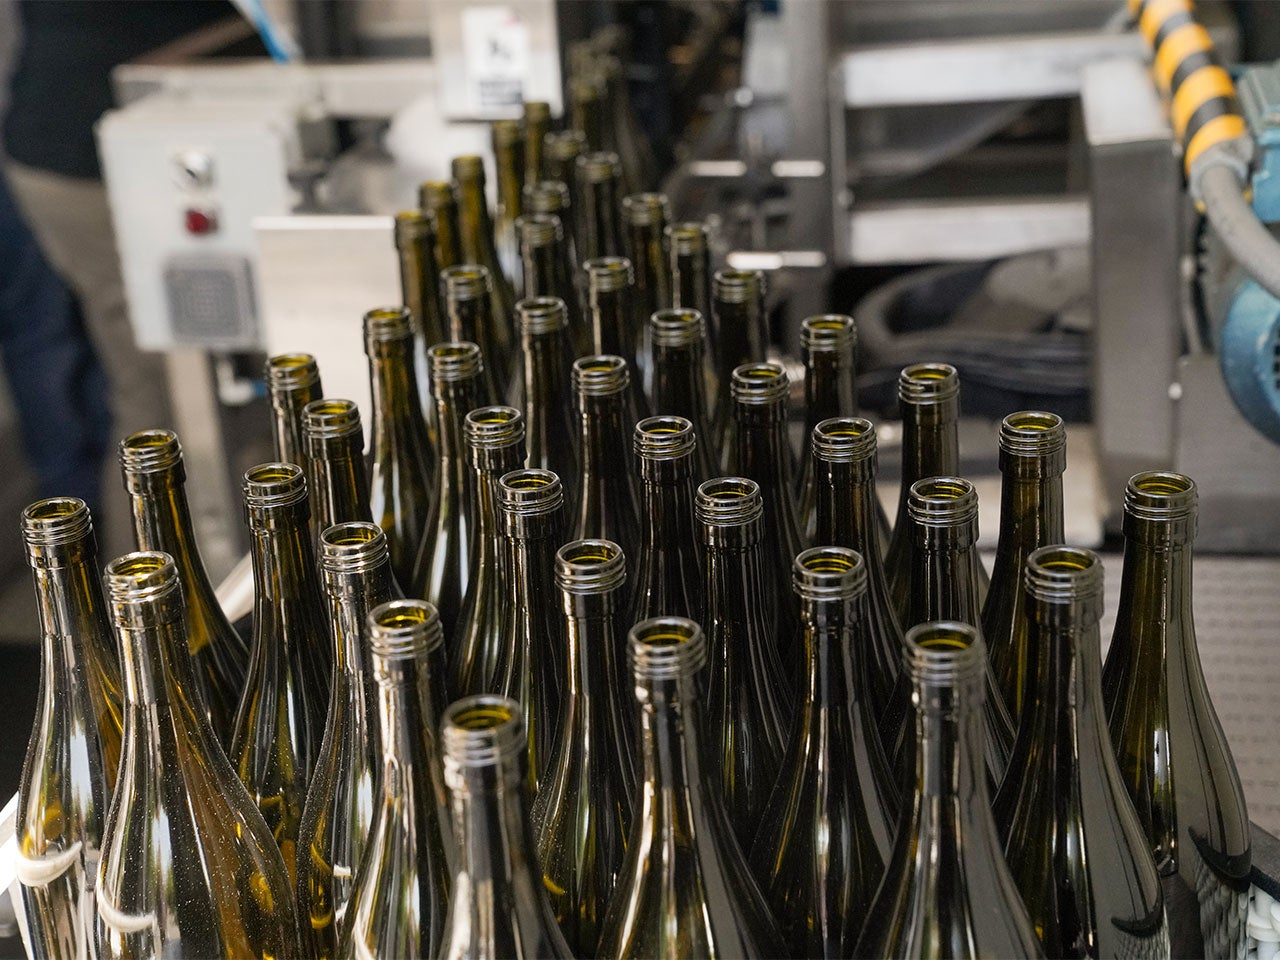 A group of empty olive-green glass wine bottles.